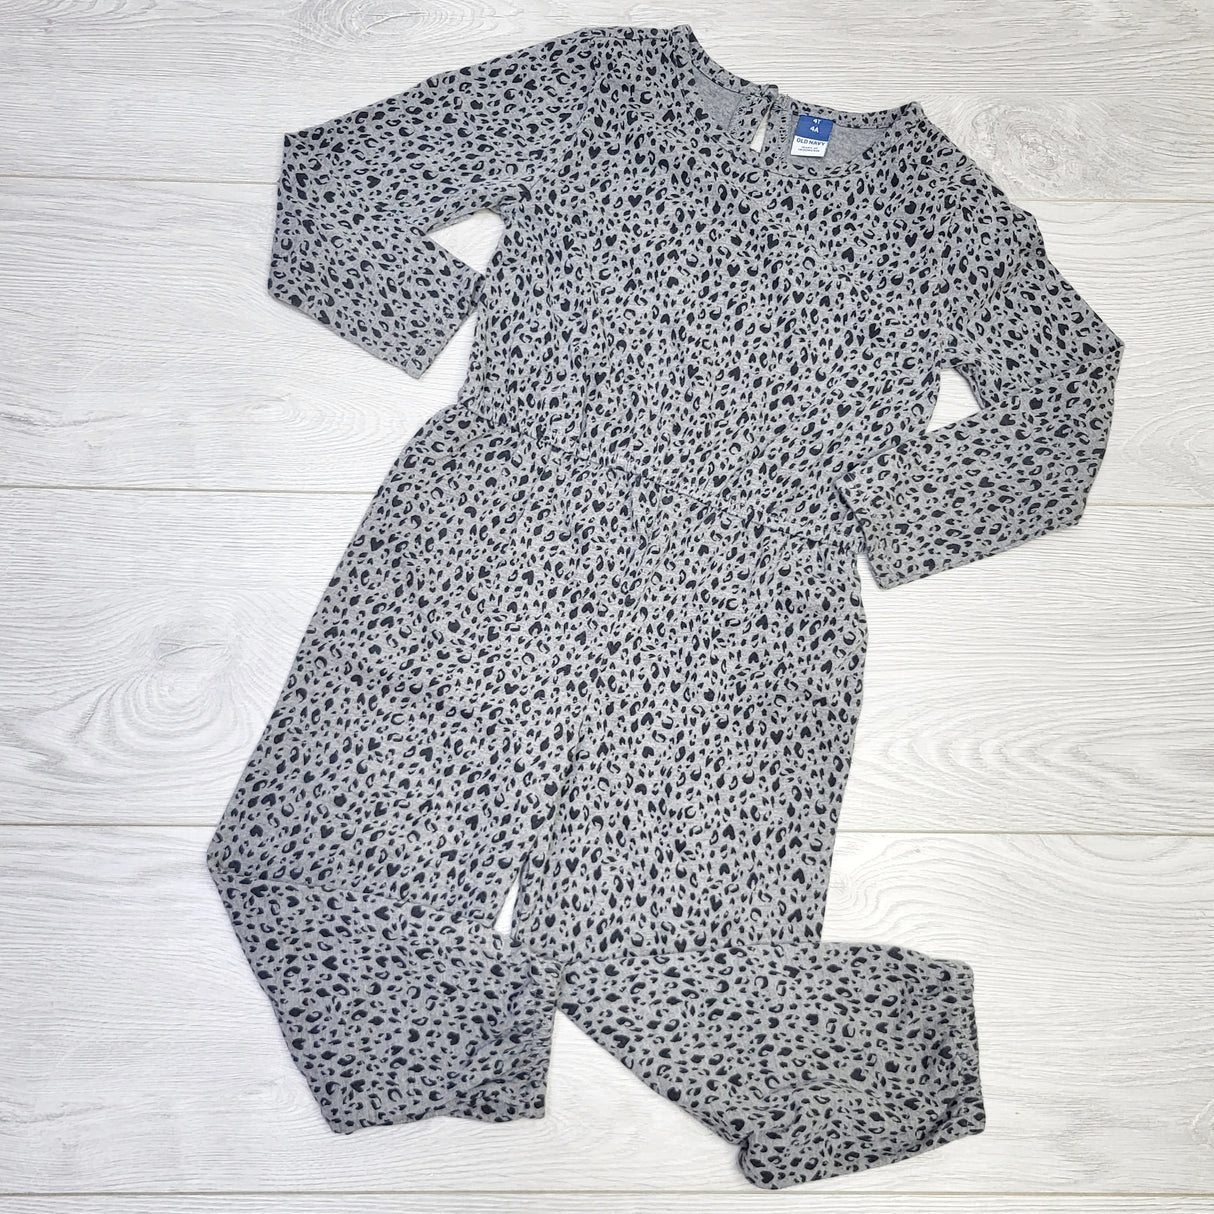 CRTH1 - Old Navy grey leopard print romper. Size 4T